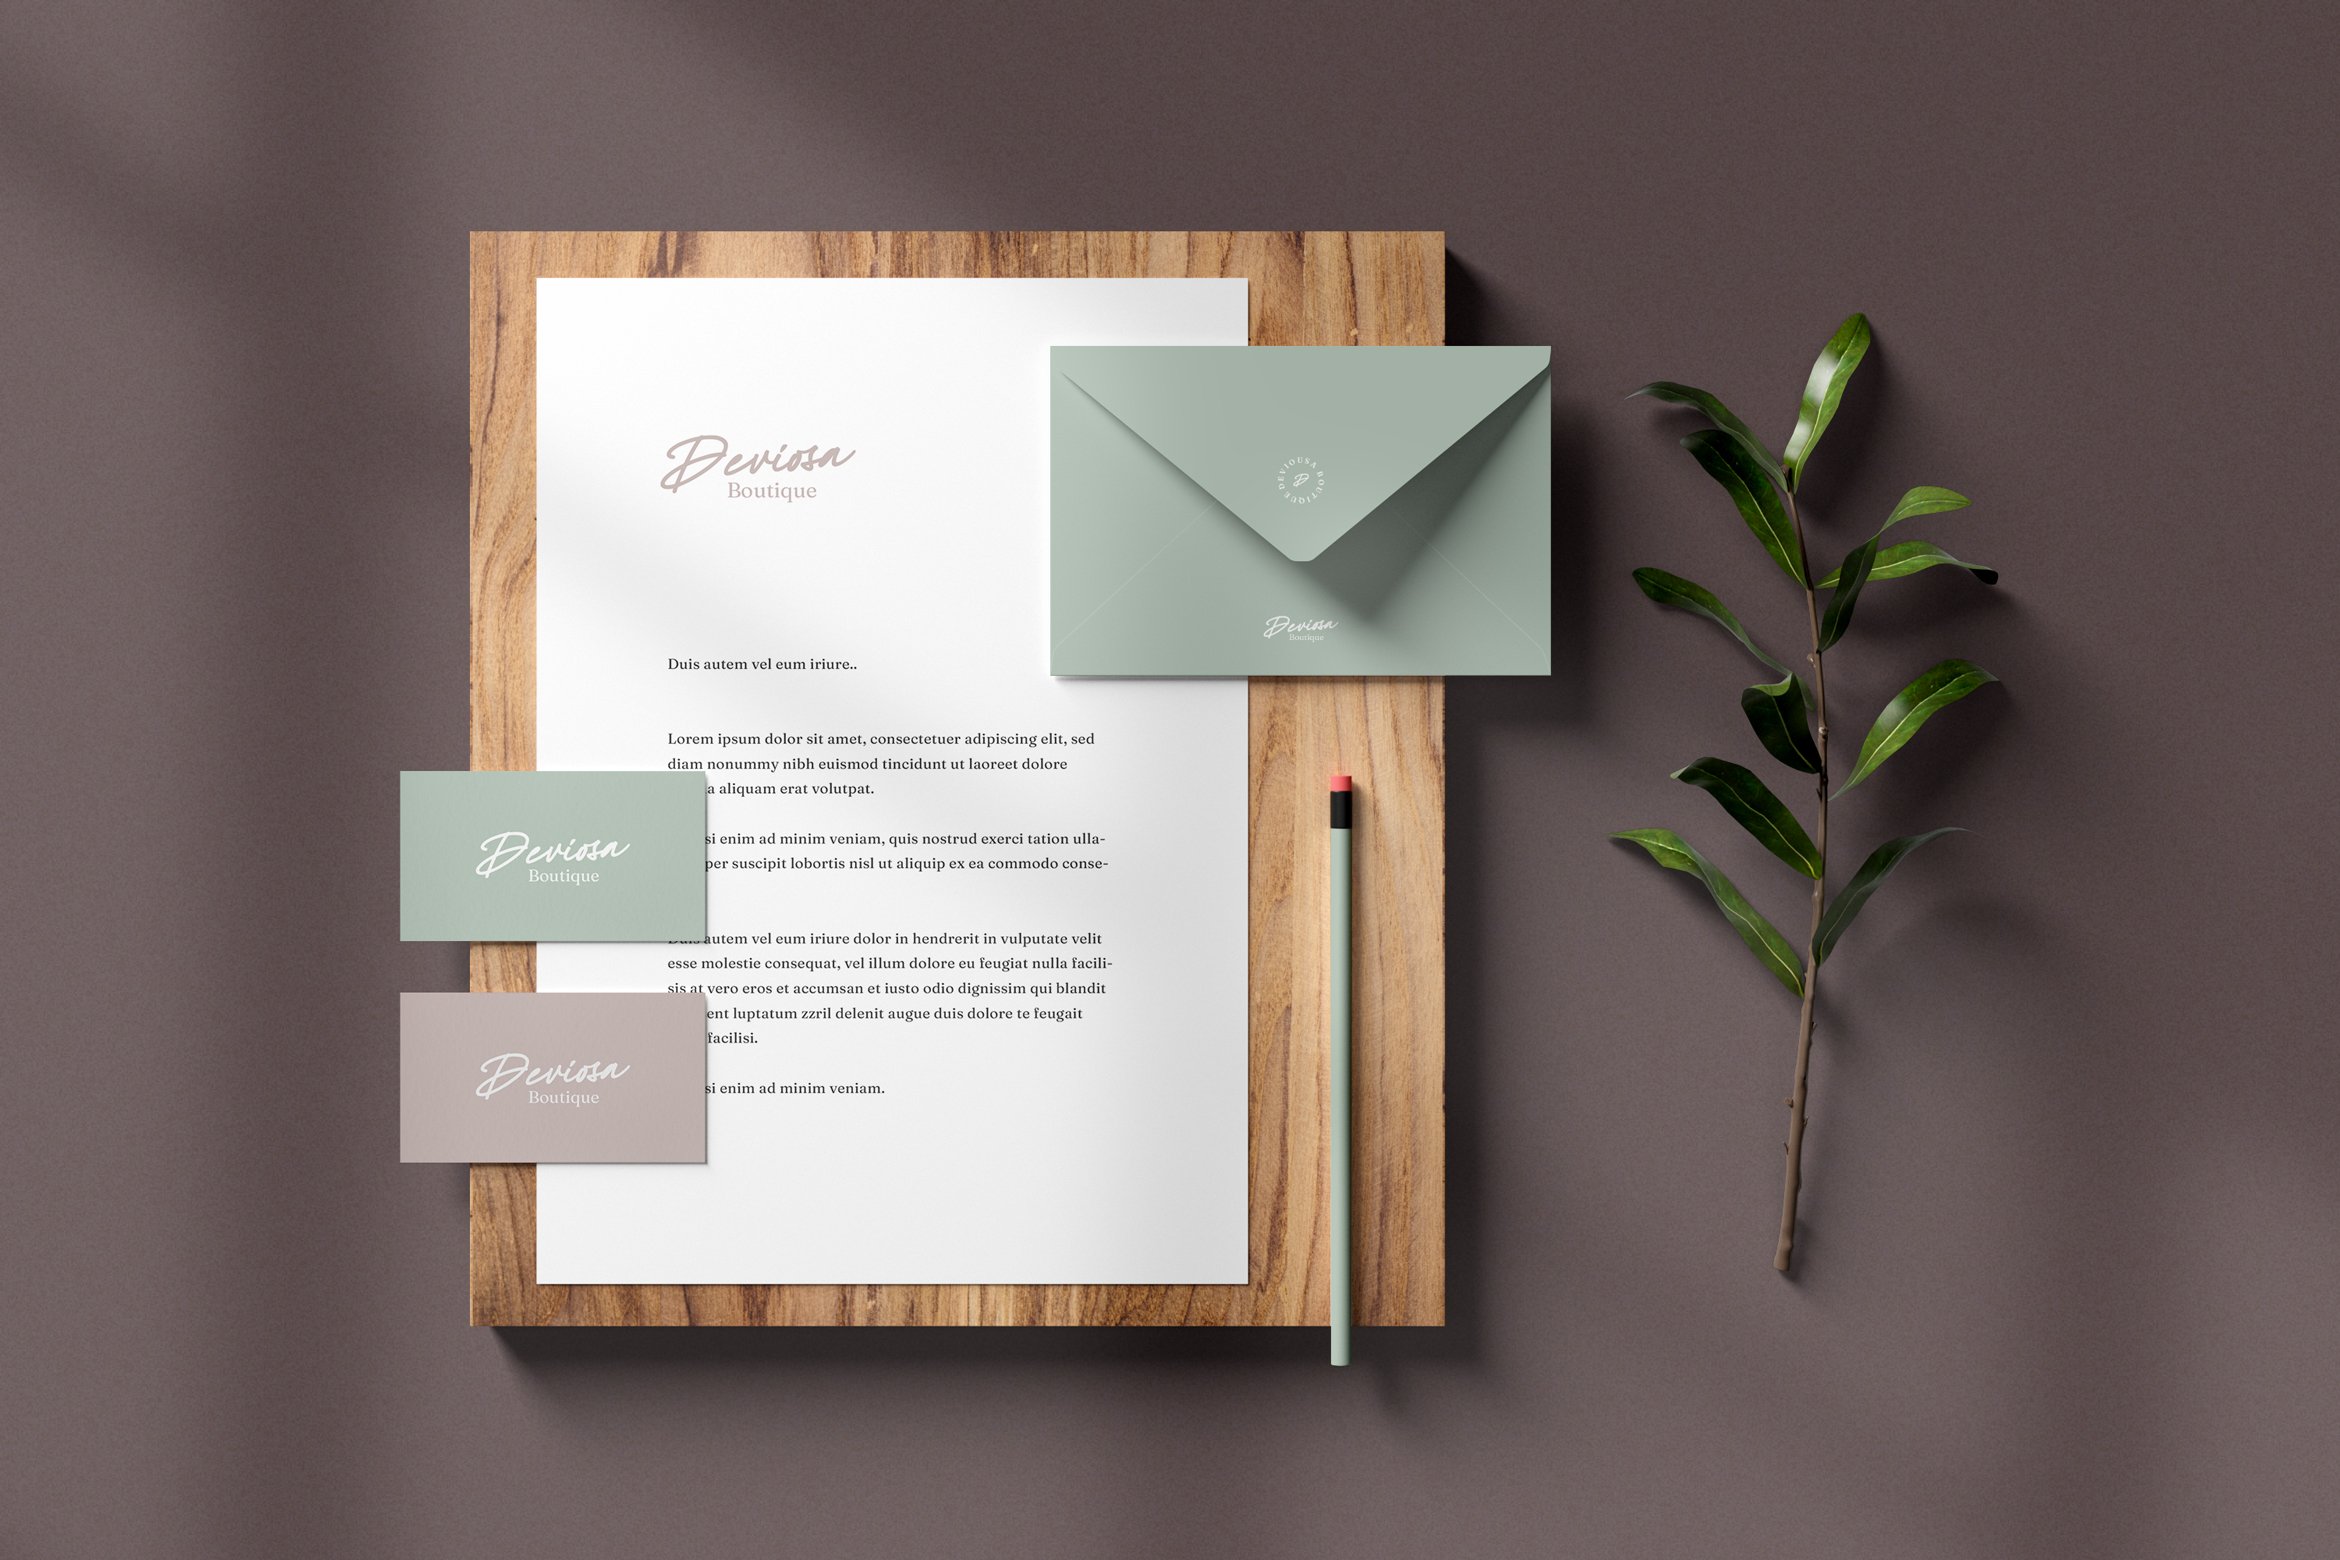 Branding and Stationery Mockups cover image.